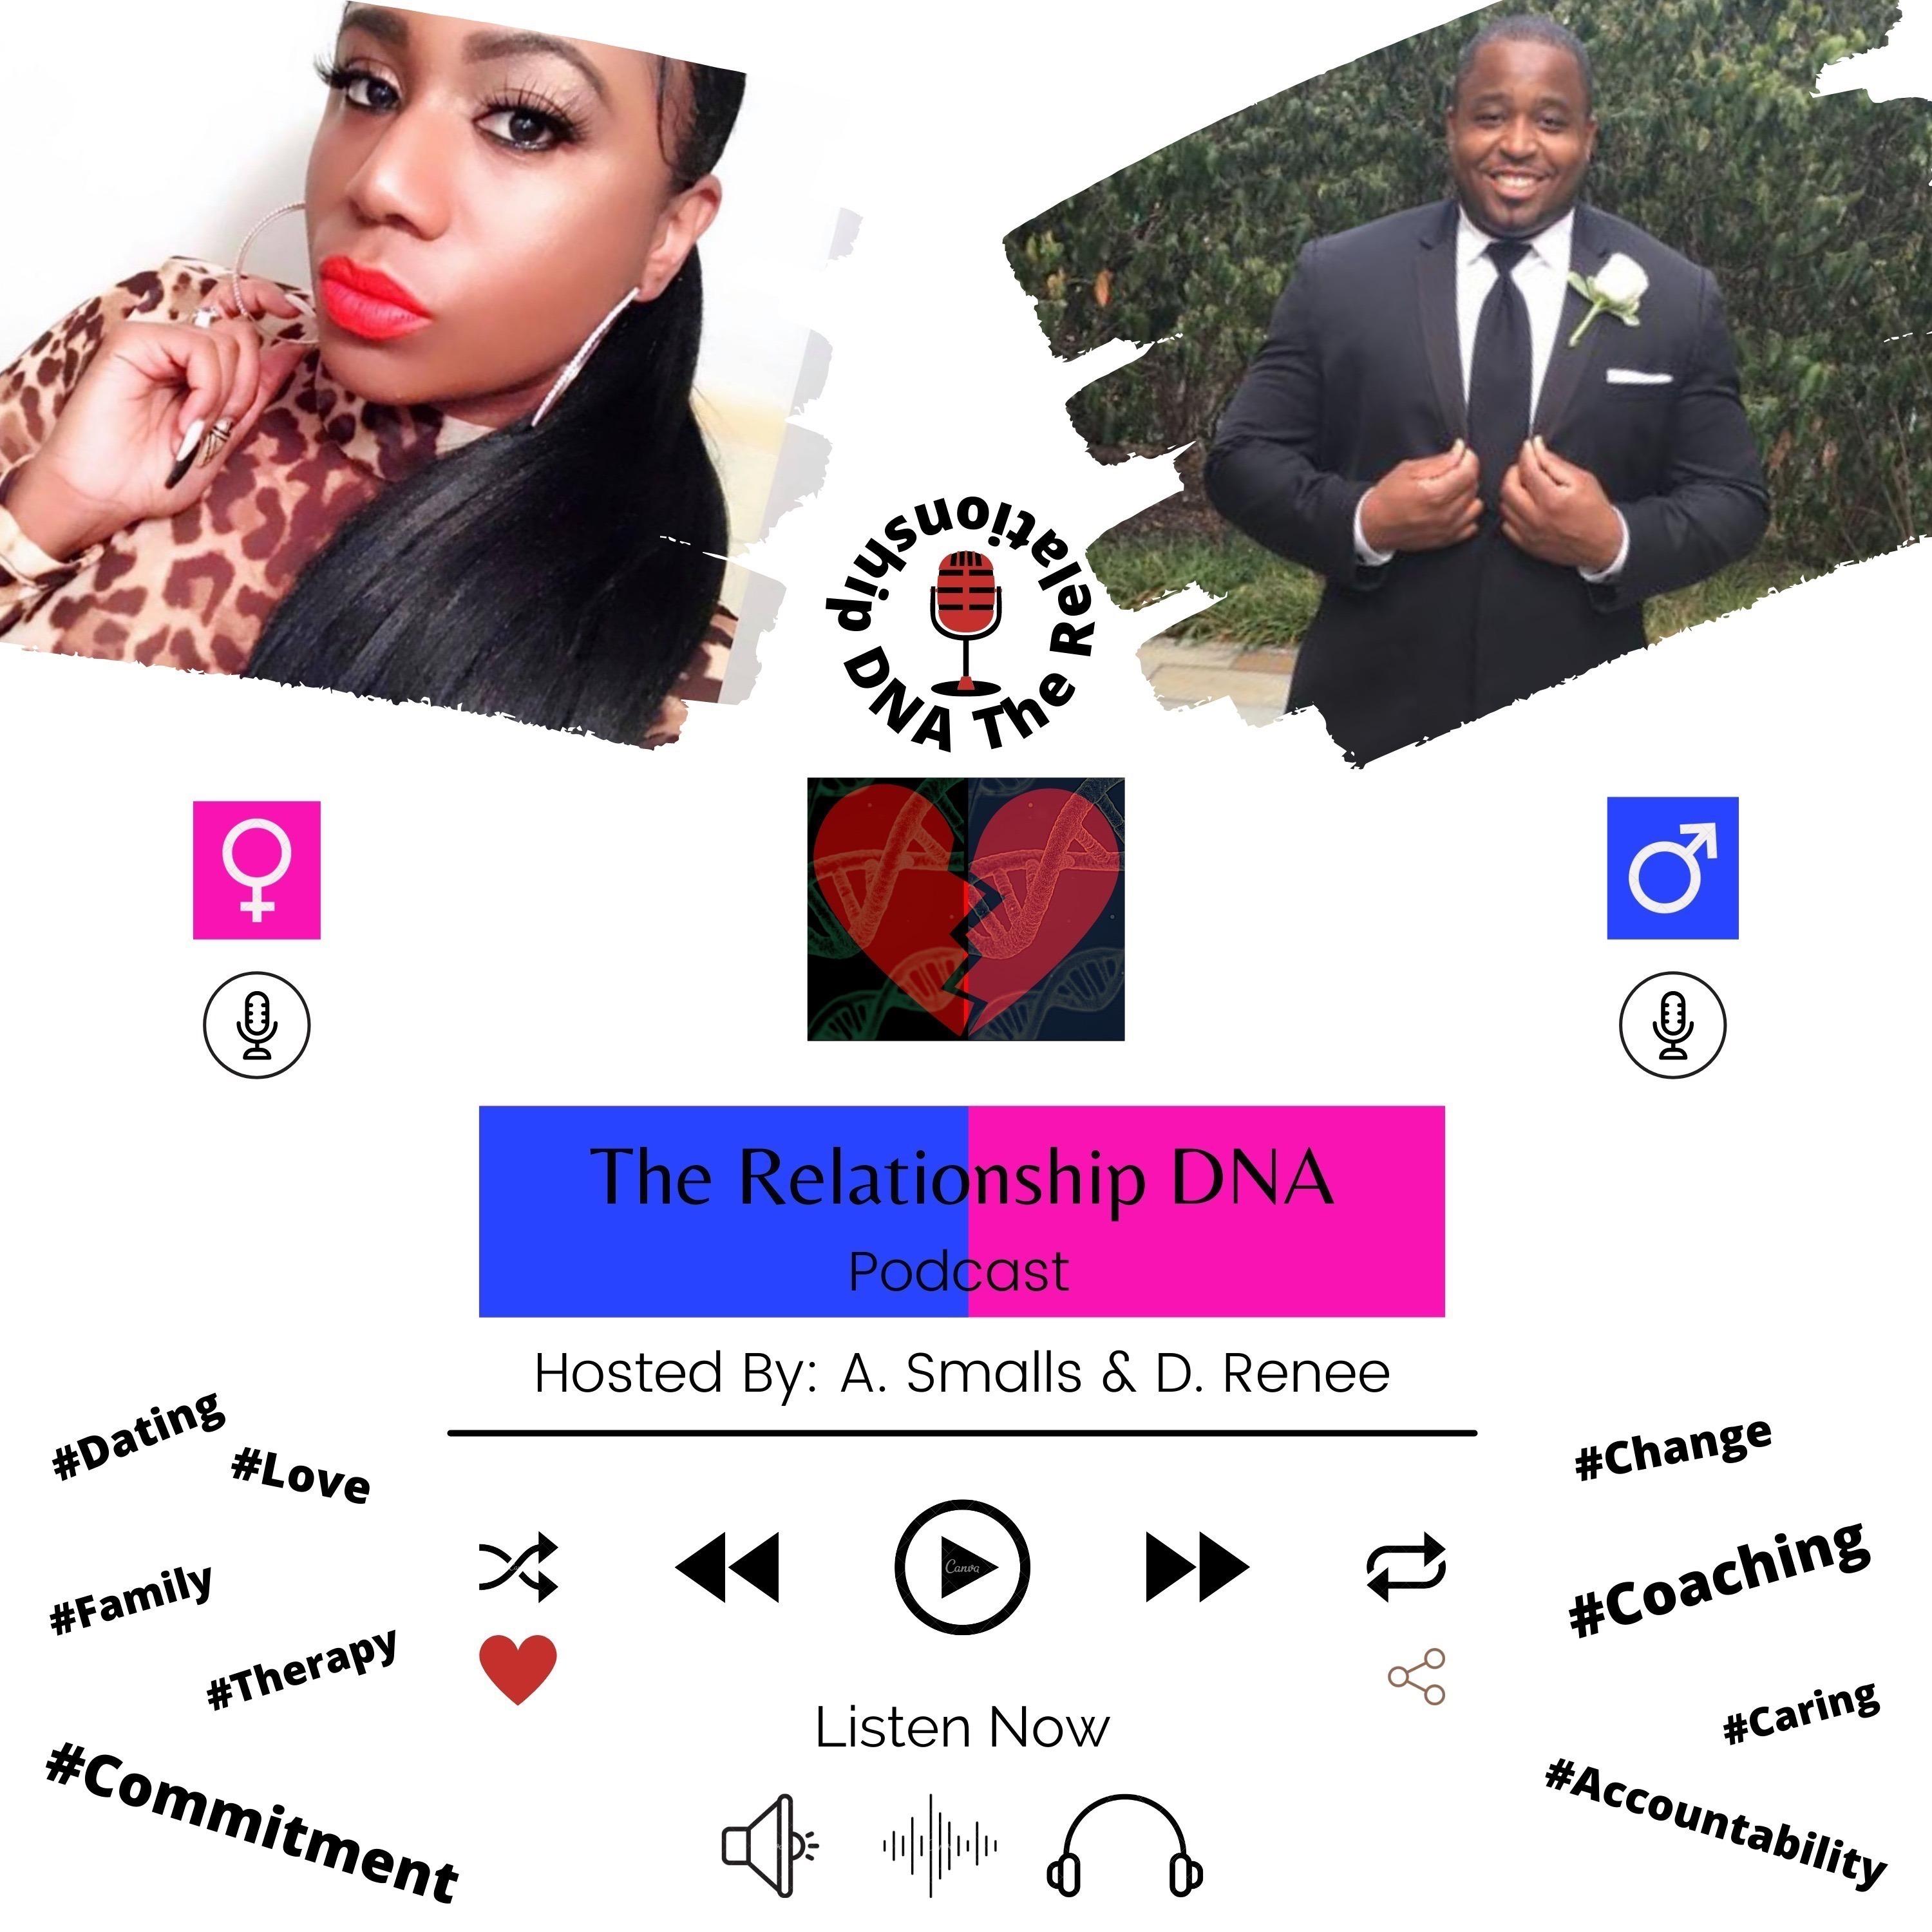 The Relationship DNA Podcast